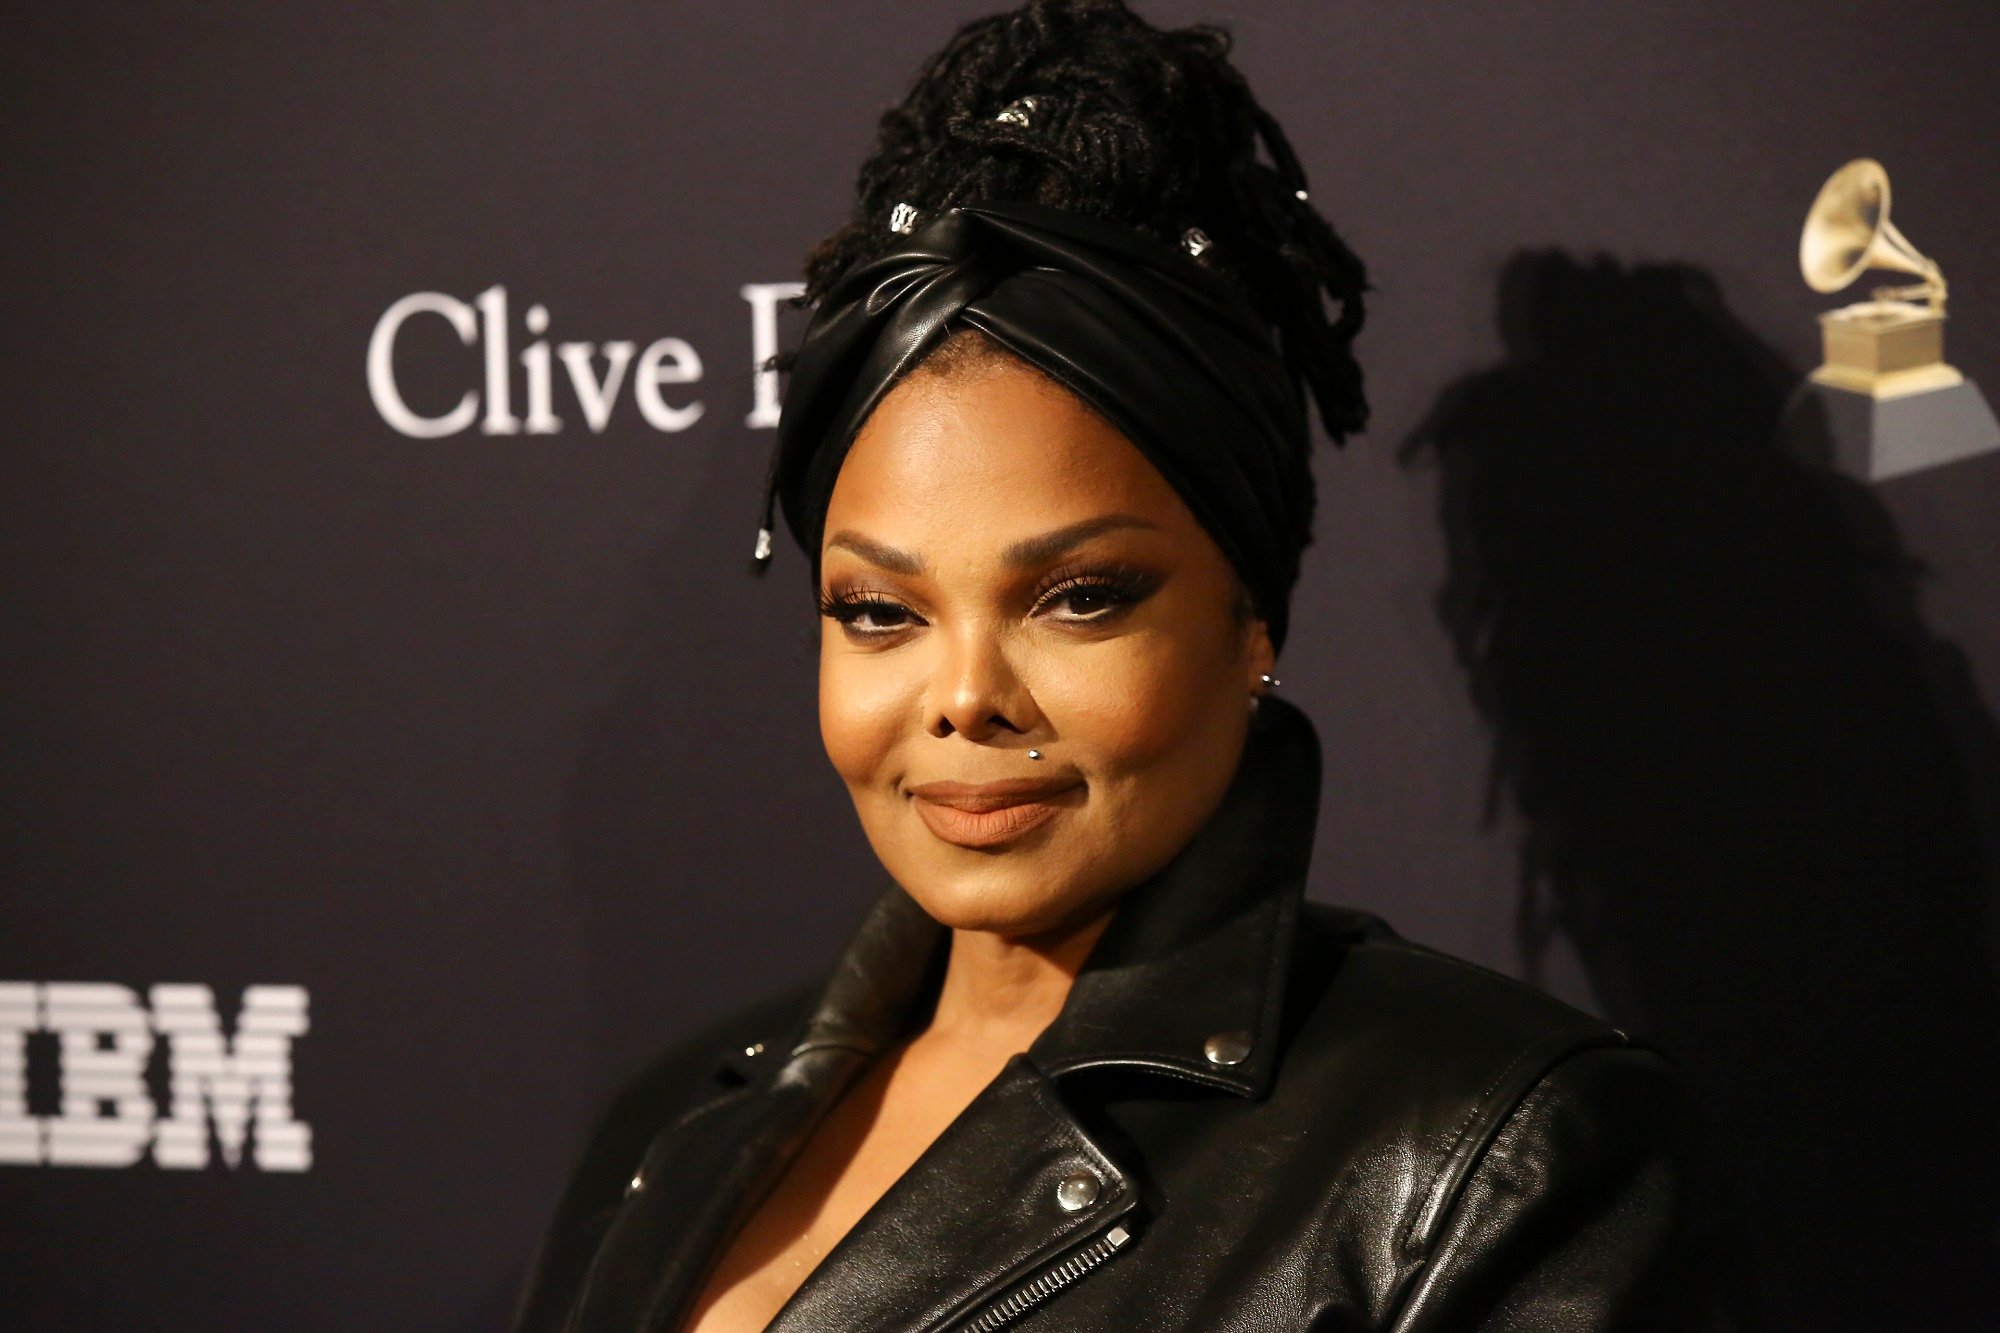 Fans Are Losing It Over Janet Jackson’s Flexibility in Stretching Video: ‘YOU STILL GOT IT BOO!’